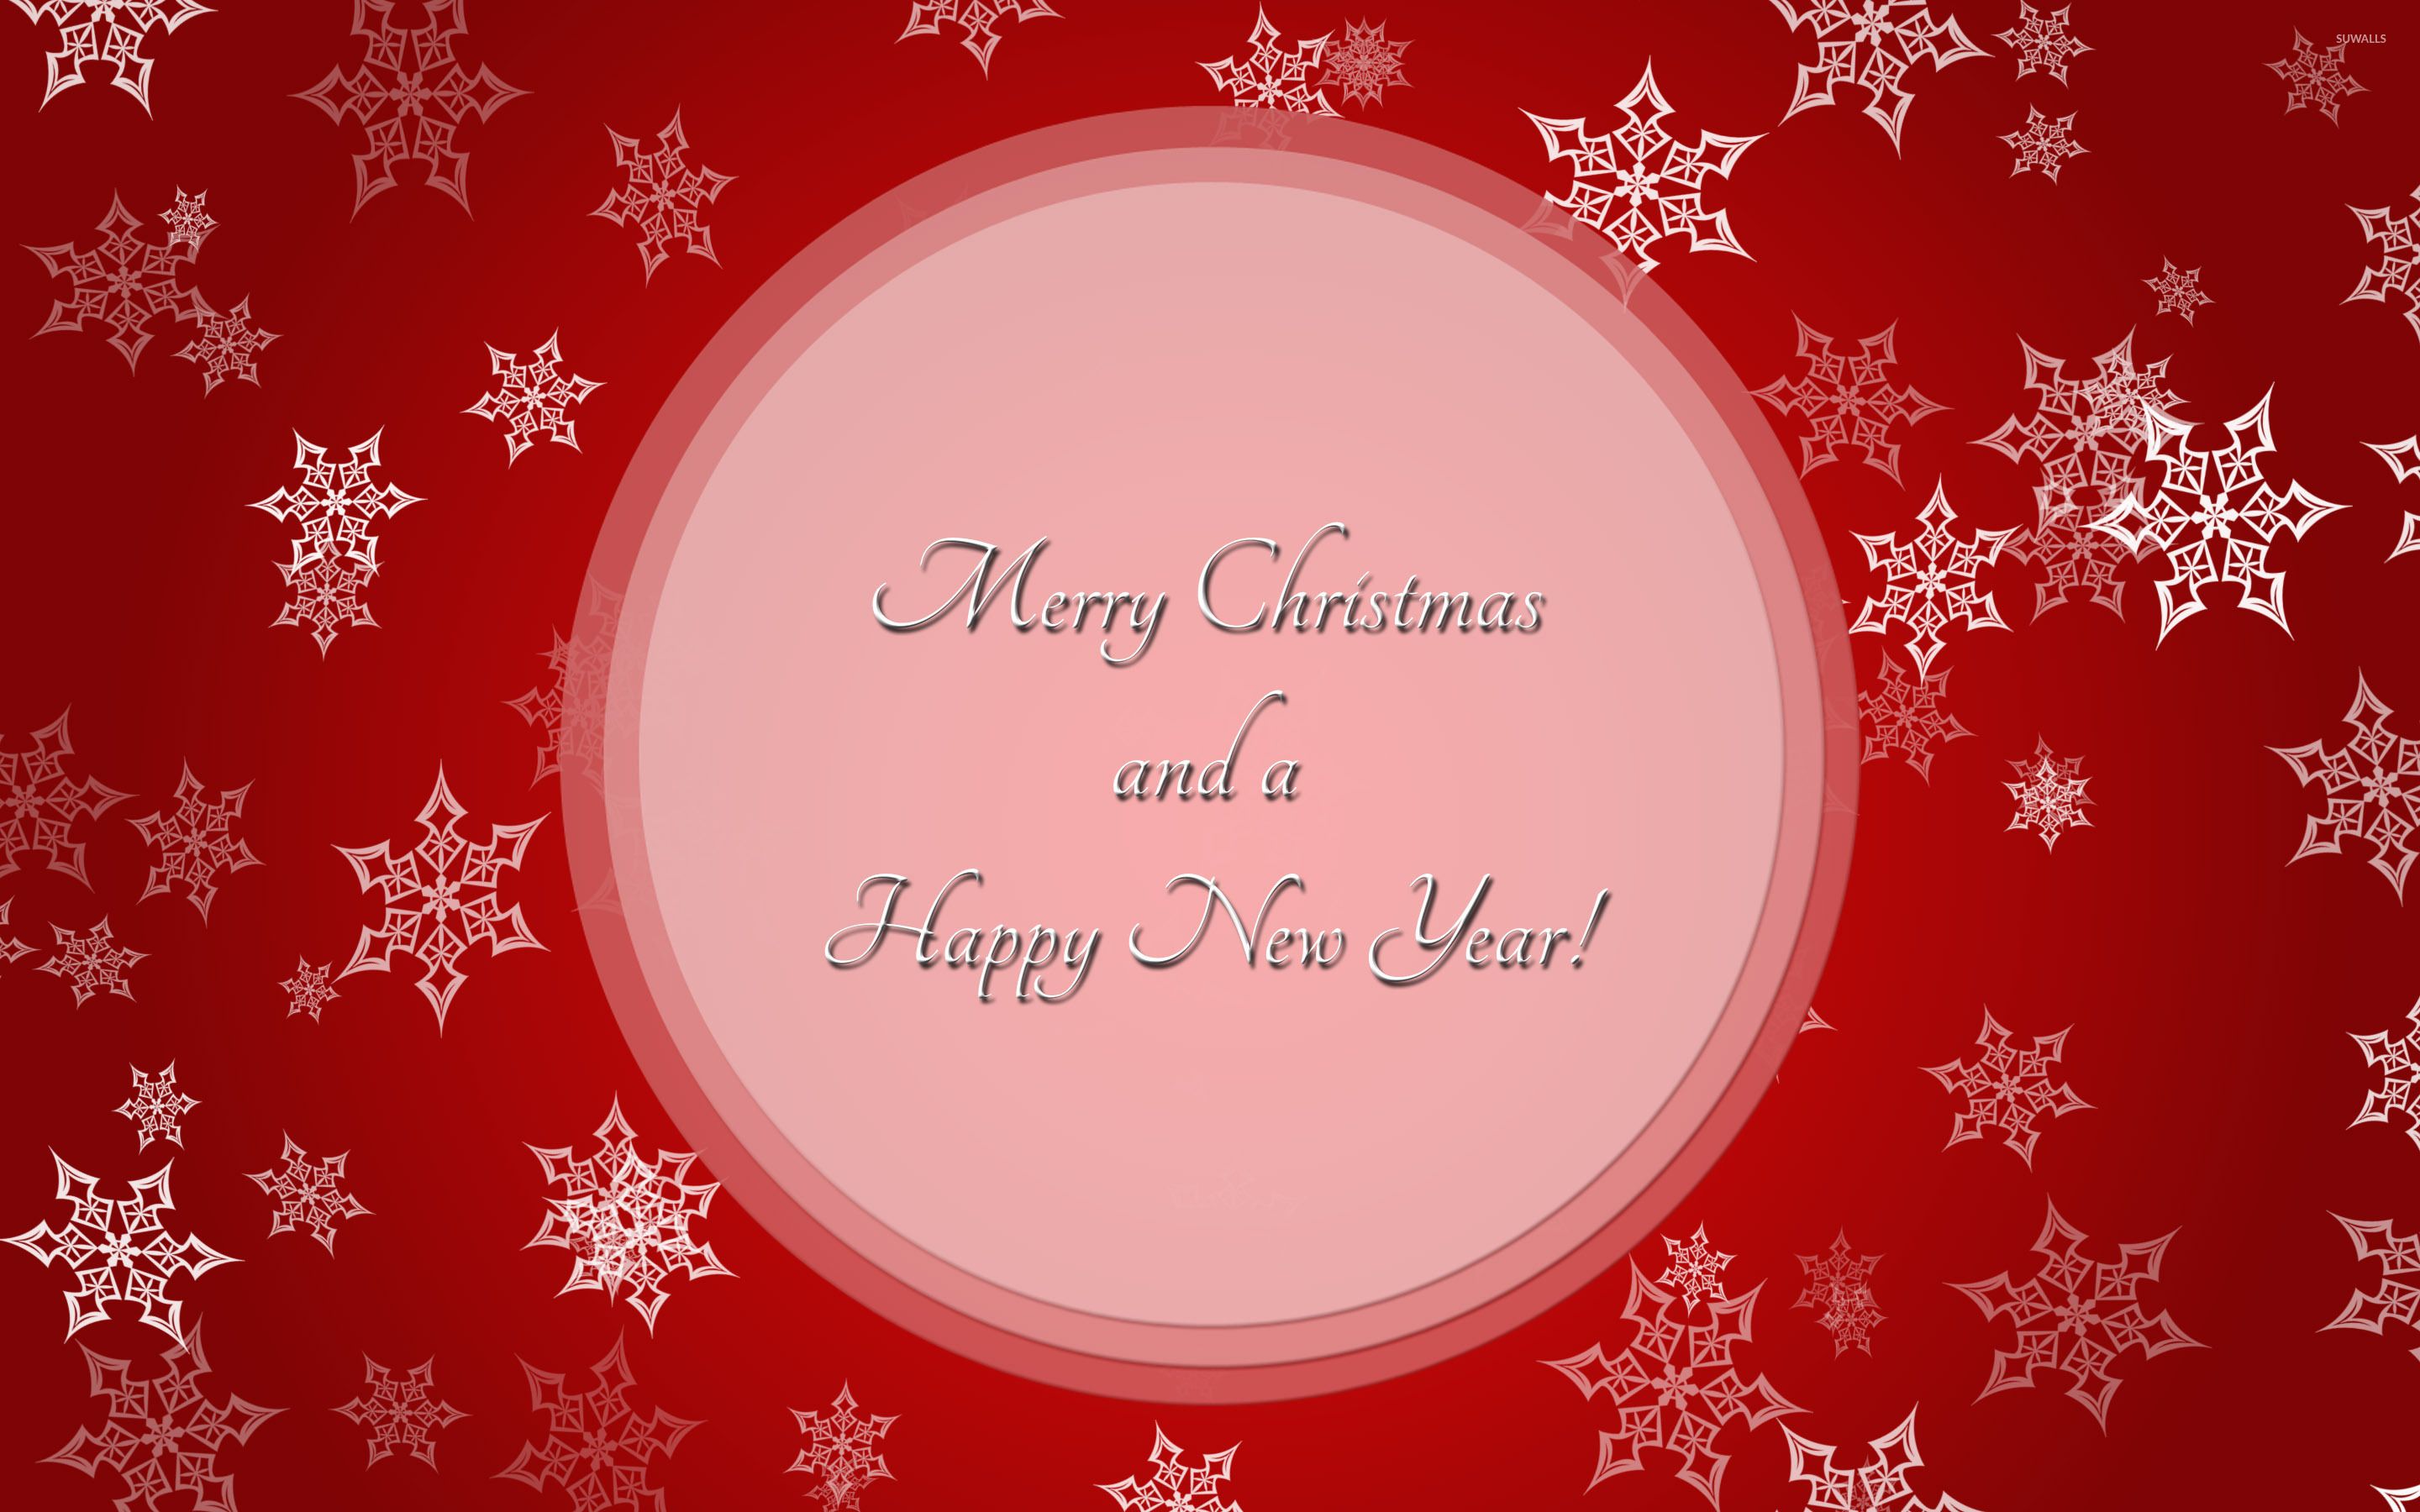 Merry Christmas and Happy New Year wallpaper wallpaper